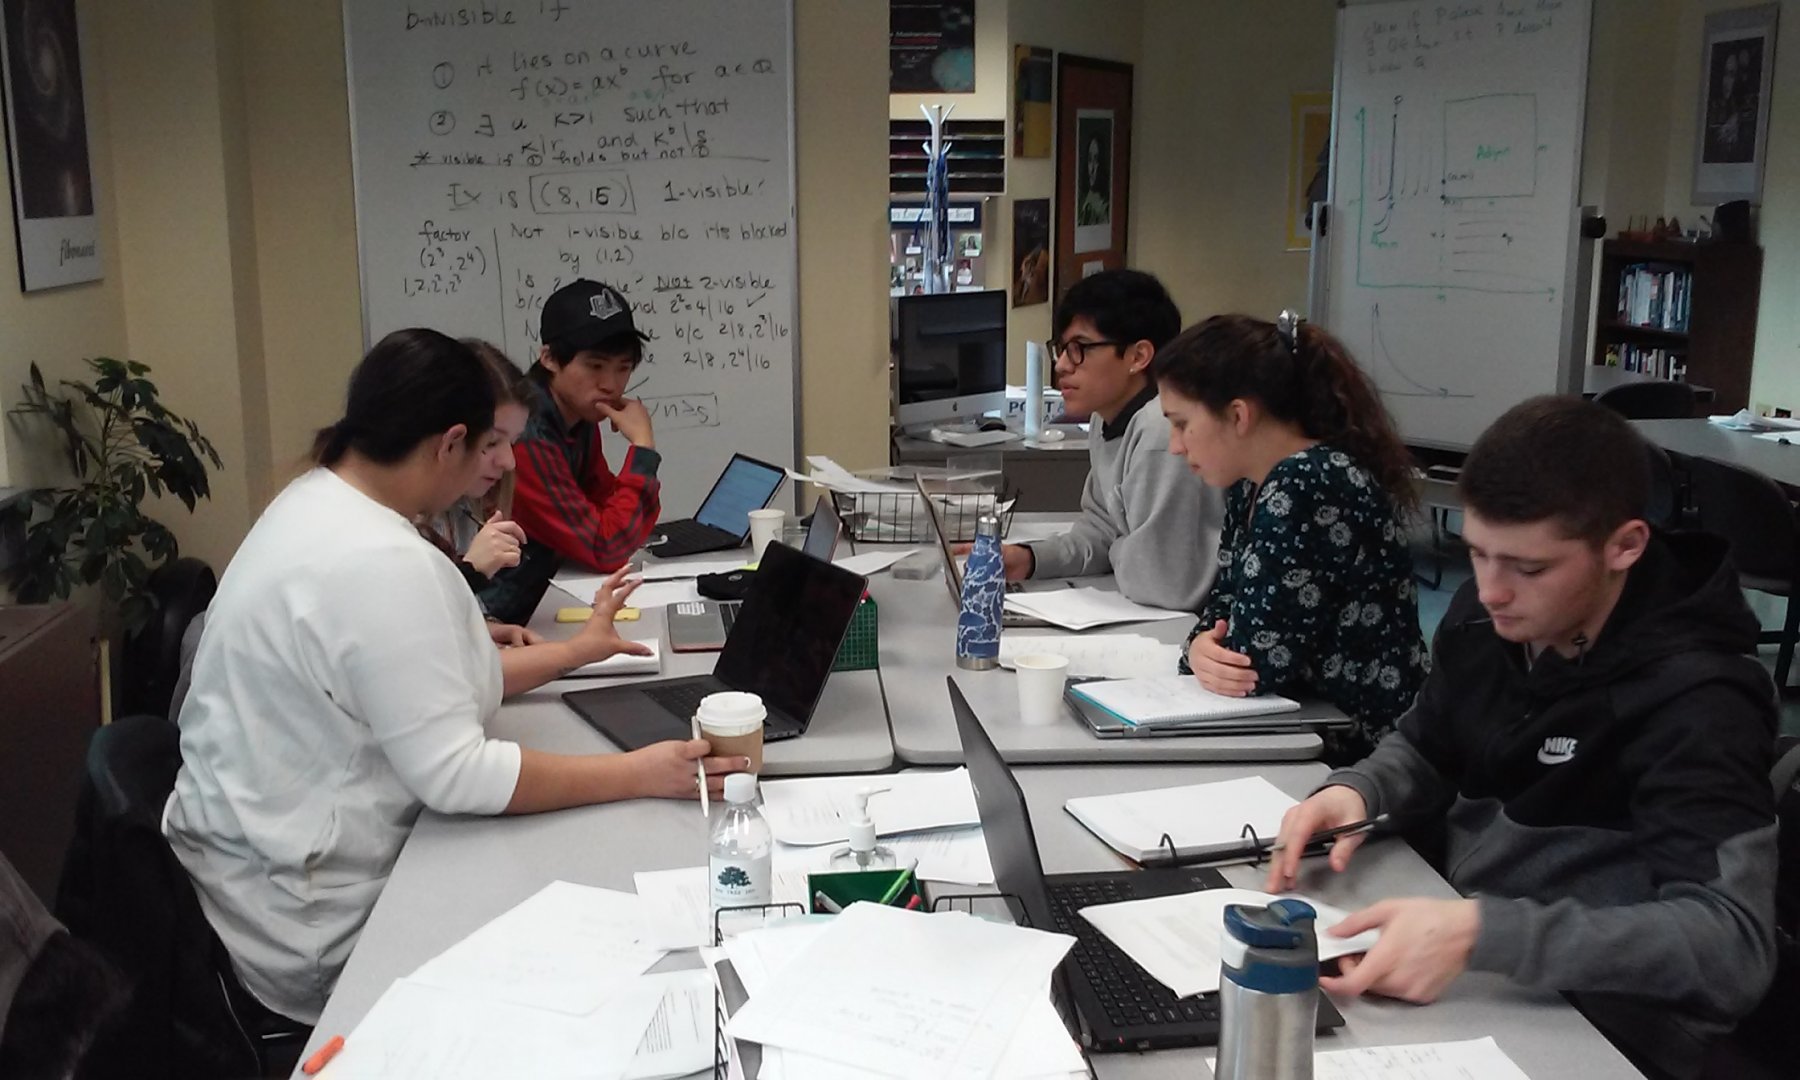 Dr. Pamela Harris lead a group of students working on a problem on Invisible Lattice Points.5